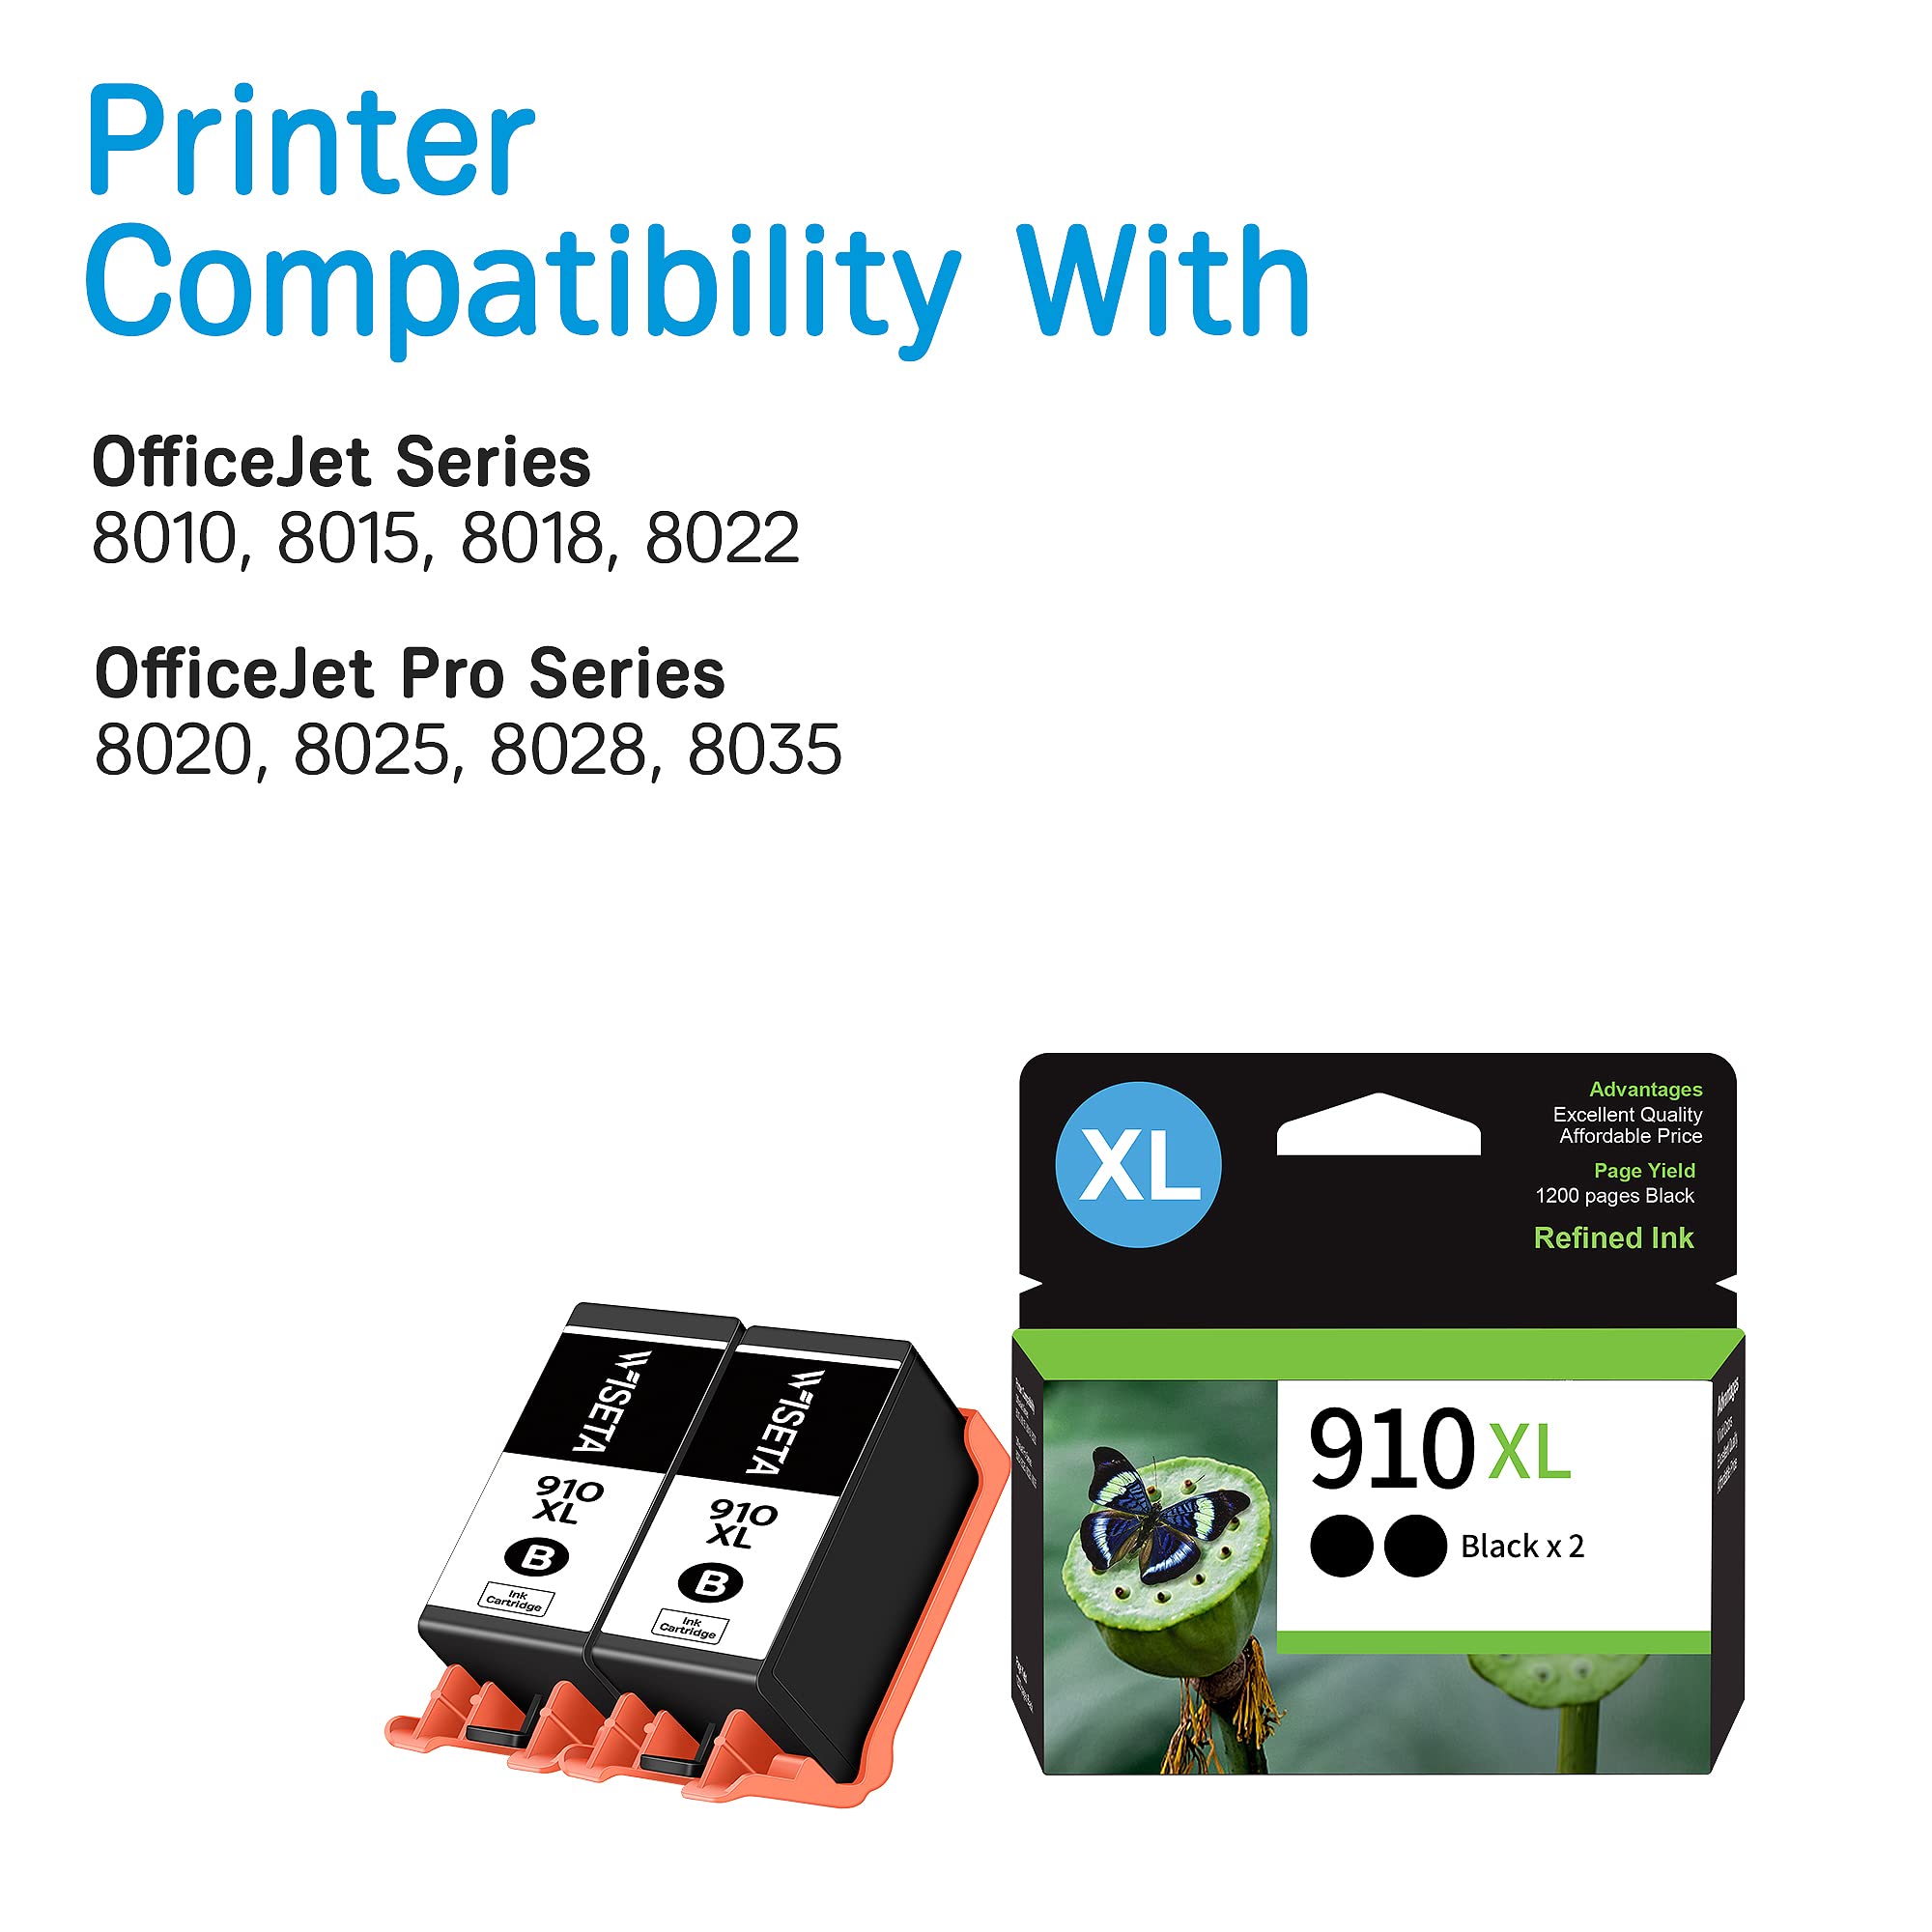 910XL 910 XL Black Ink Cartridges Replacement for HP 910XL 910 Ink Cartridge Compatible with Officejet Pro 8025e 8028e 8035e 8028 8025 Printer (2 Black HP 910XL Ink Cartridges for HP Printer)